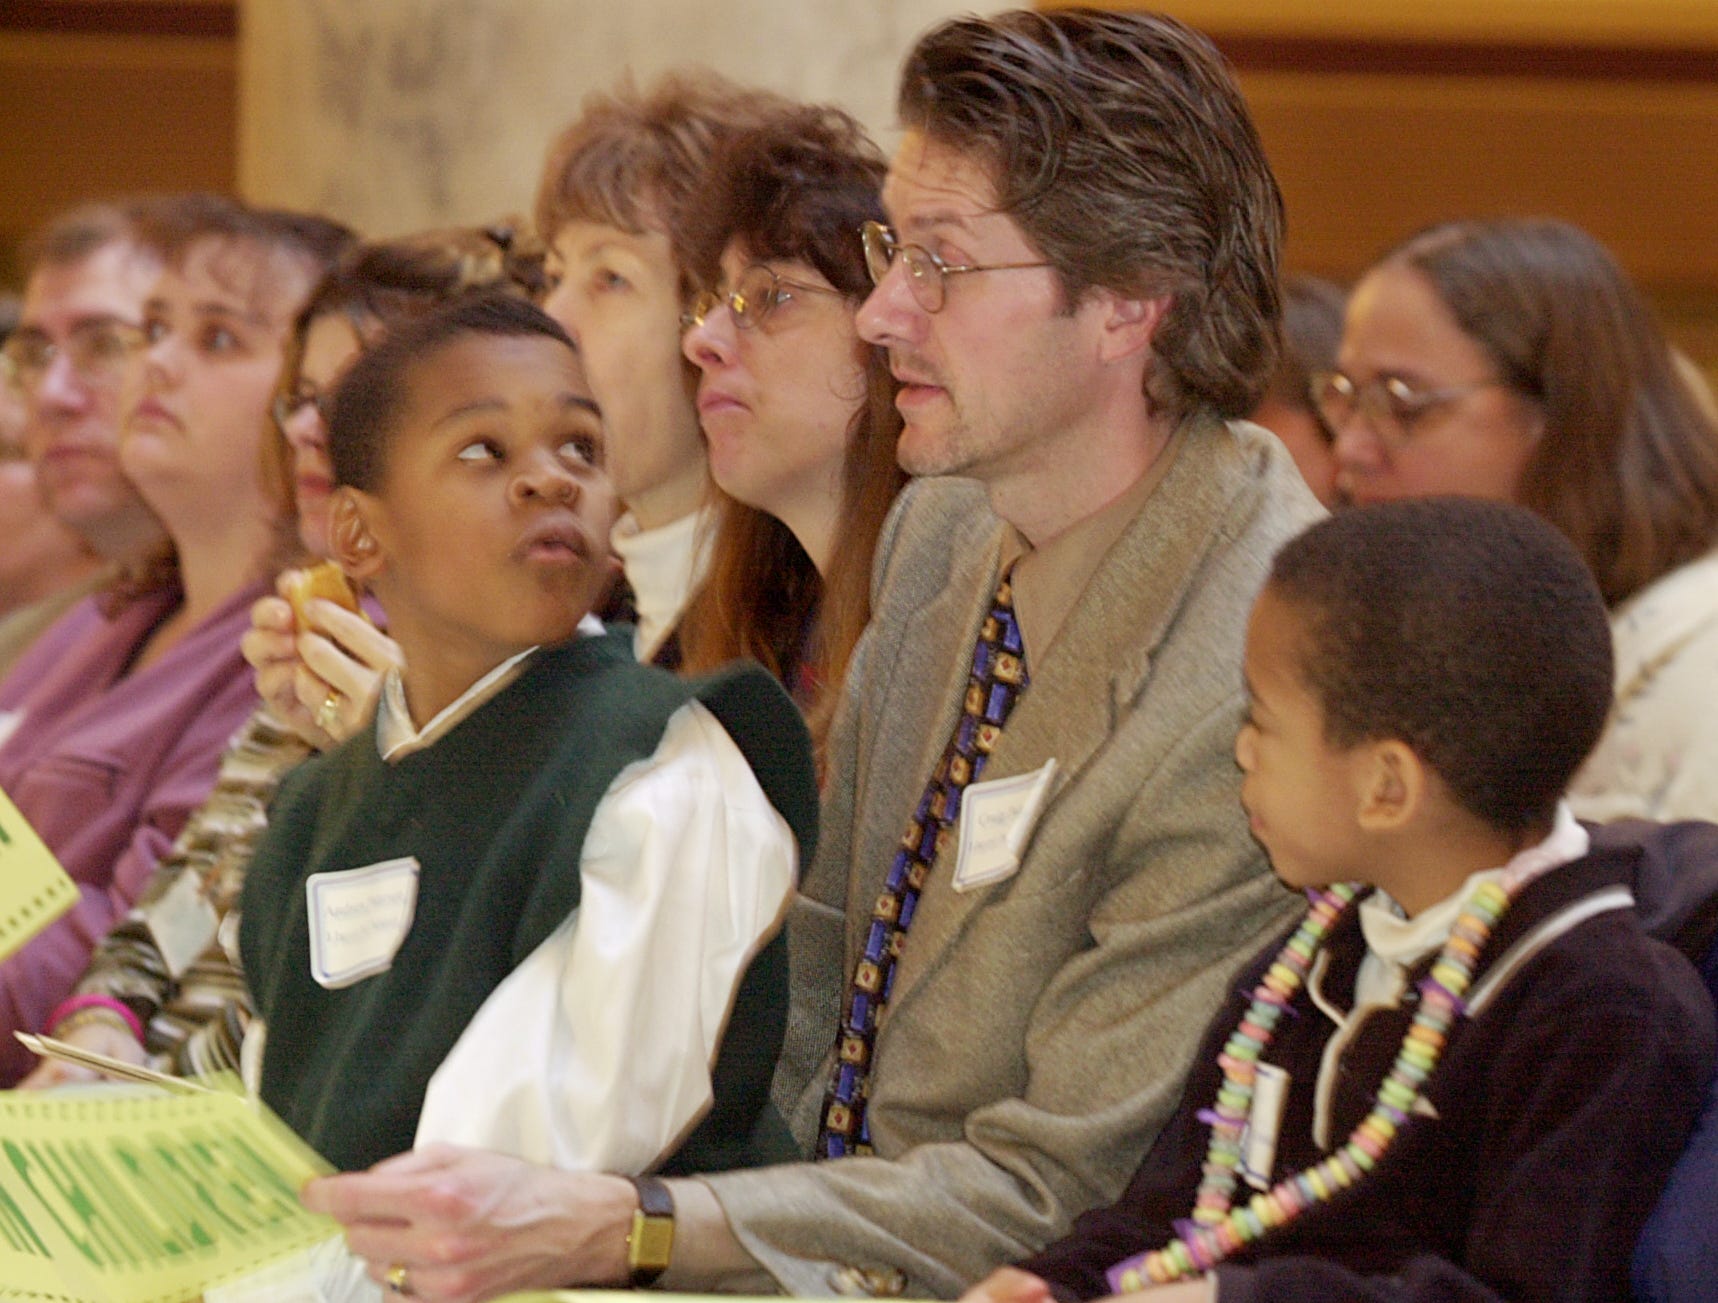 Craig Peterson, alongside his sons, Michael (right), 6, and Andrew, 7, attend a rally for children's issues at the Indiana State Capitol in 2001.